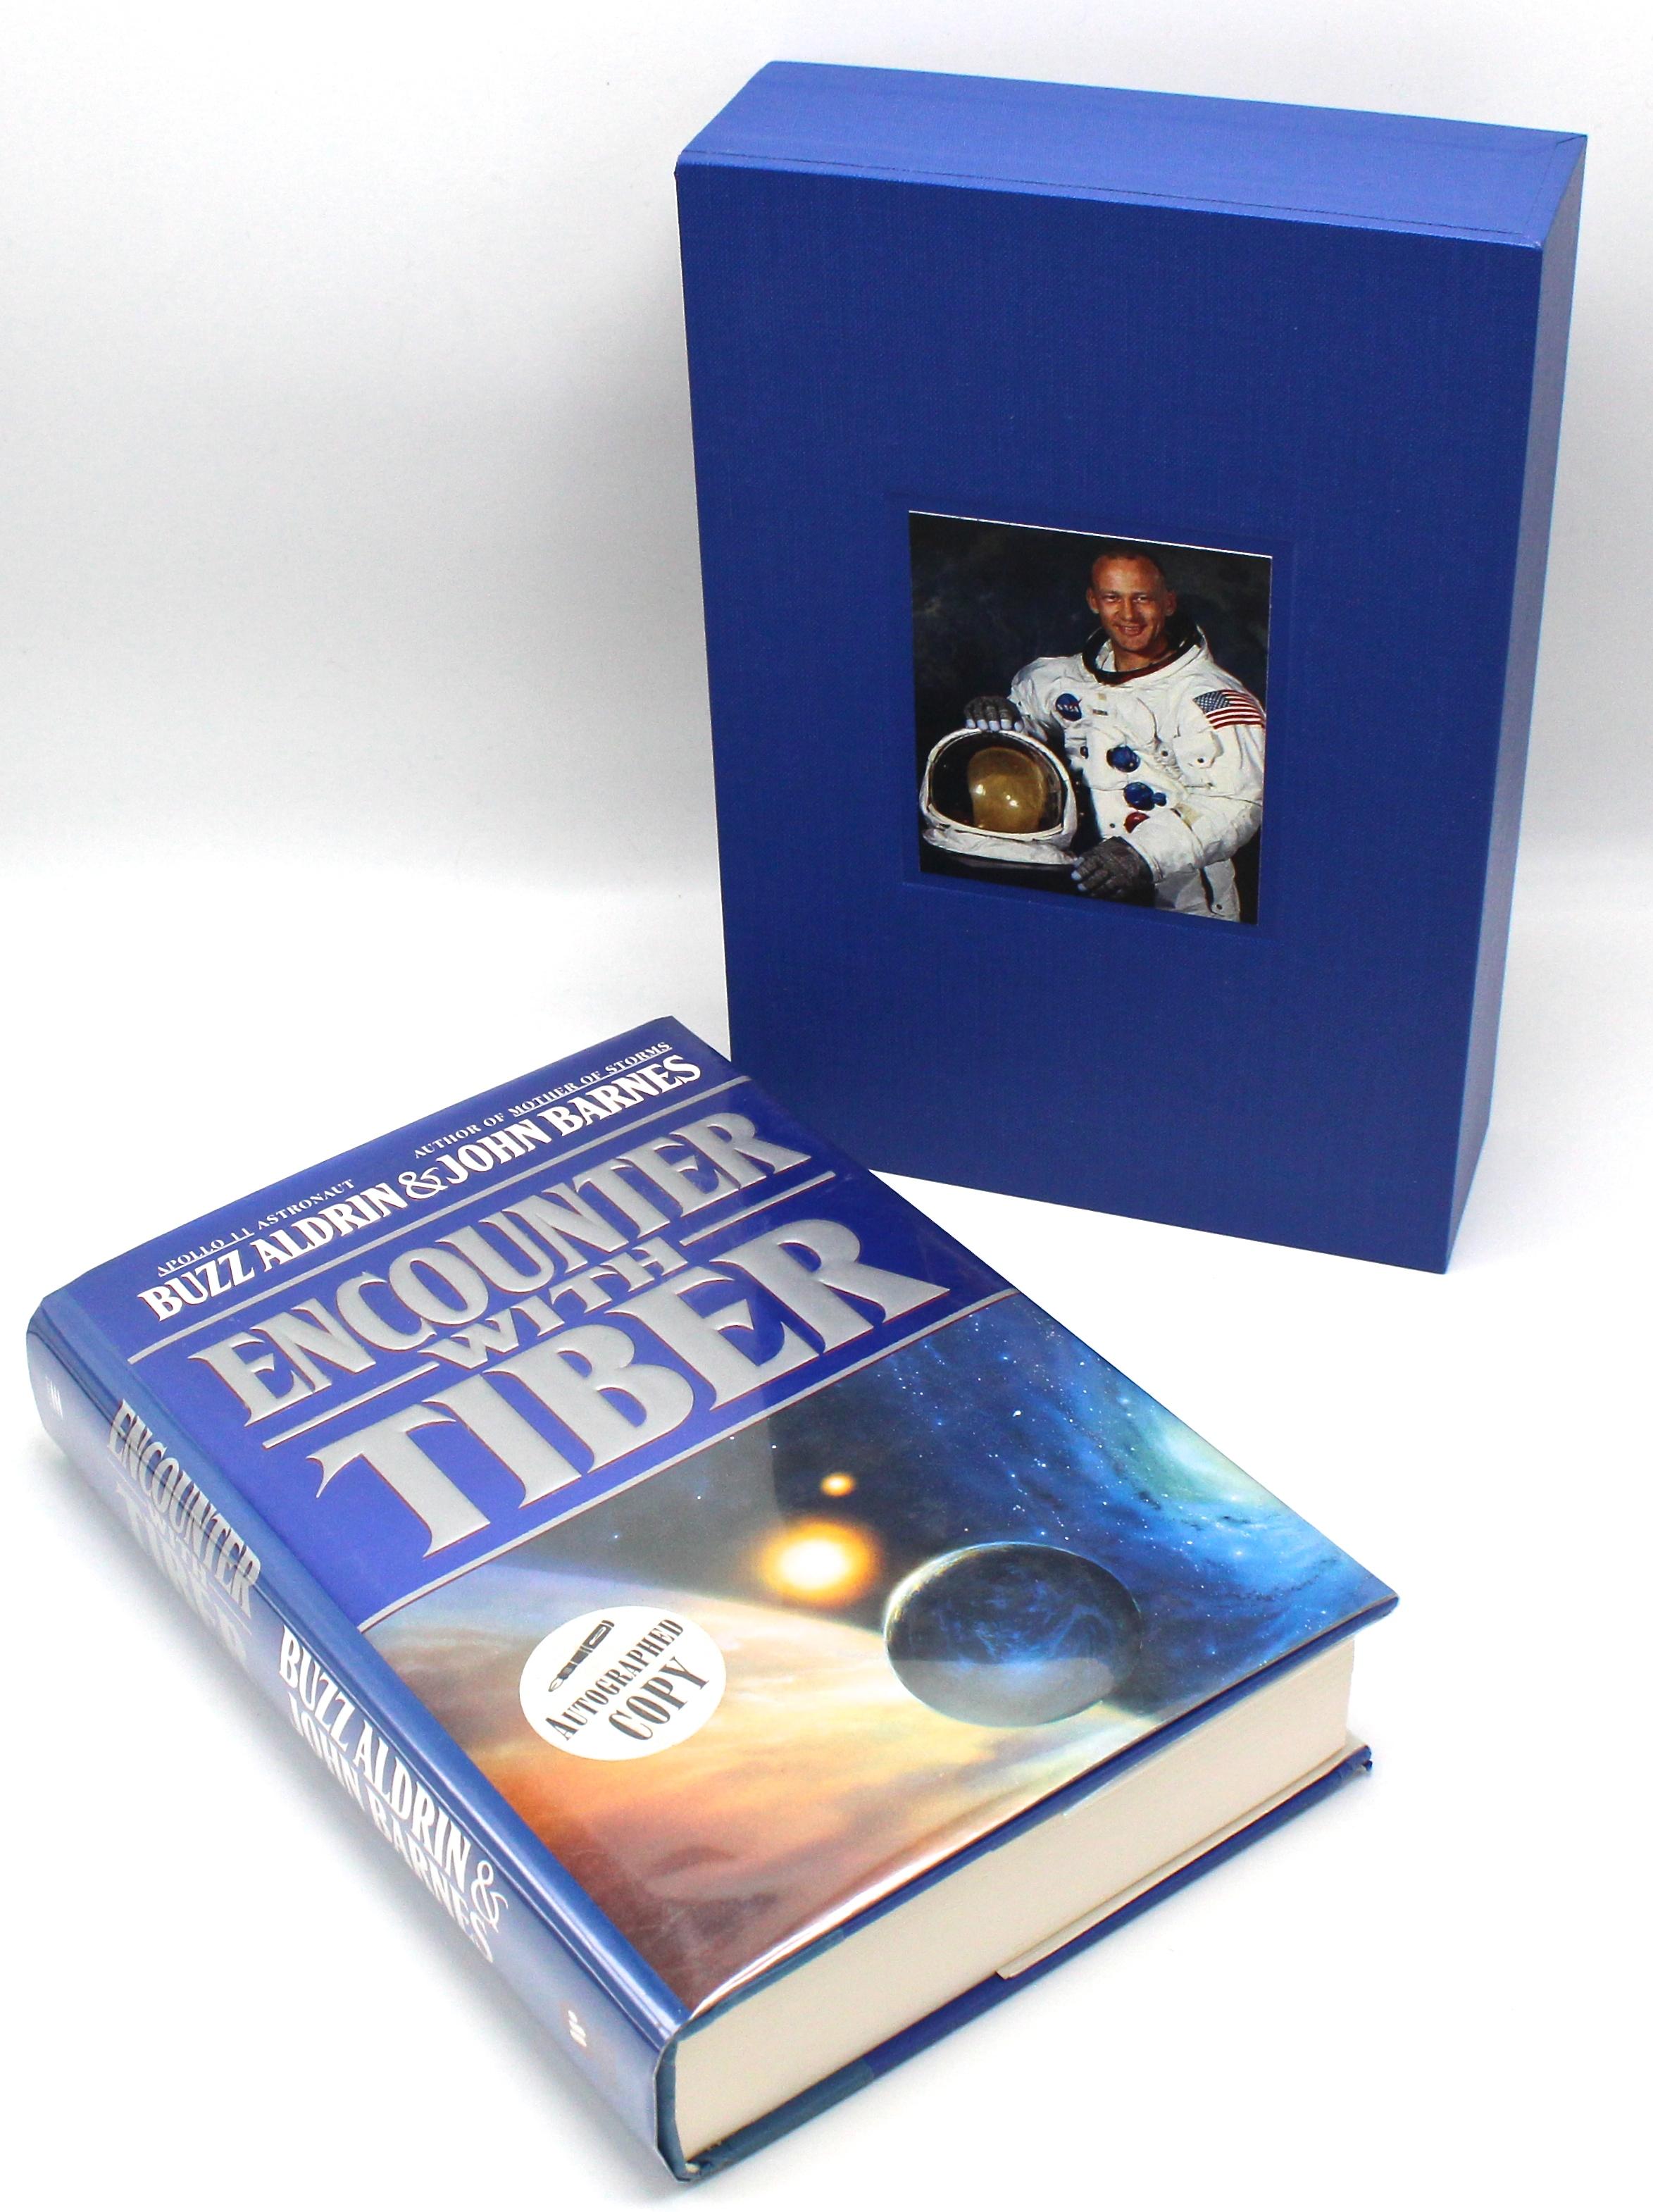 Aldrin, Buzz, Barnes, John, Encounter with Tiber. New York: Warner Books, 1996. Signed First Edition. Original dust jacket.

Presented is the first edition of Buzz Aldrin's ?Encounter with Tiber?, which we wrote in conjunction with John Barnes. The